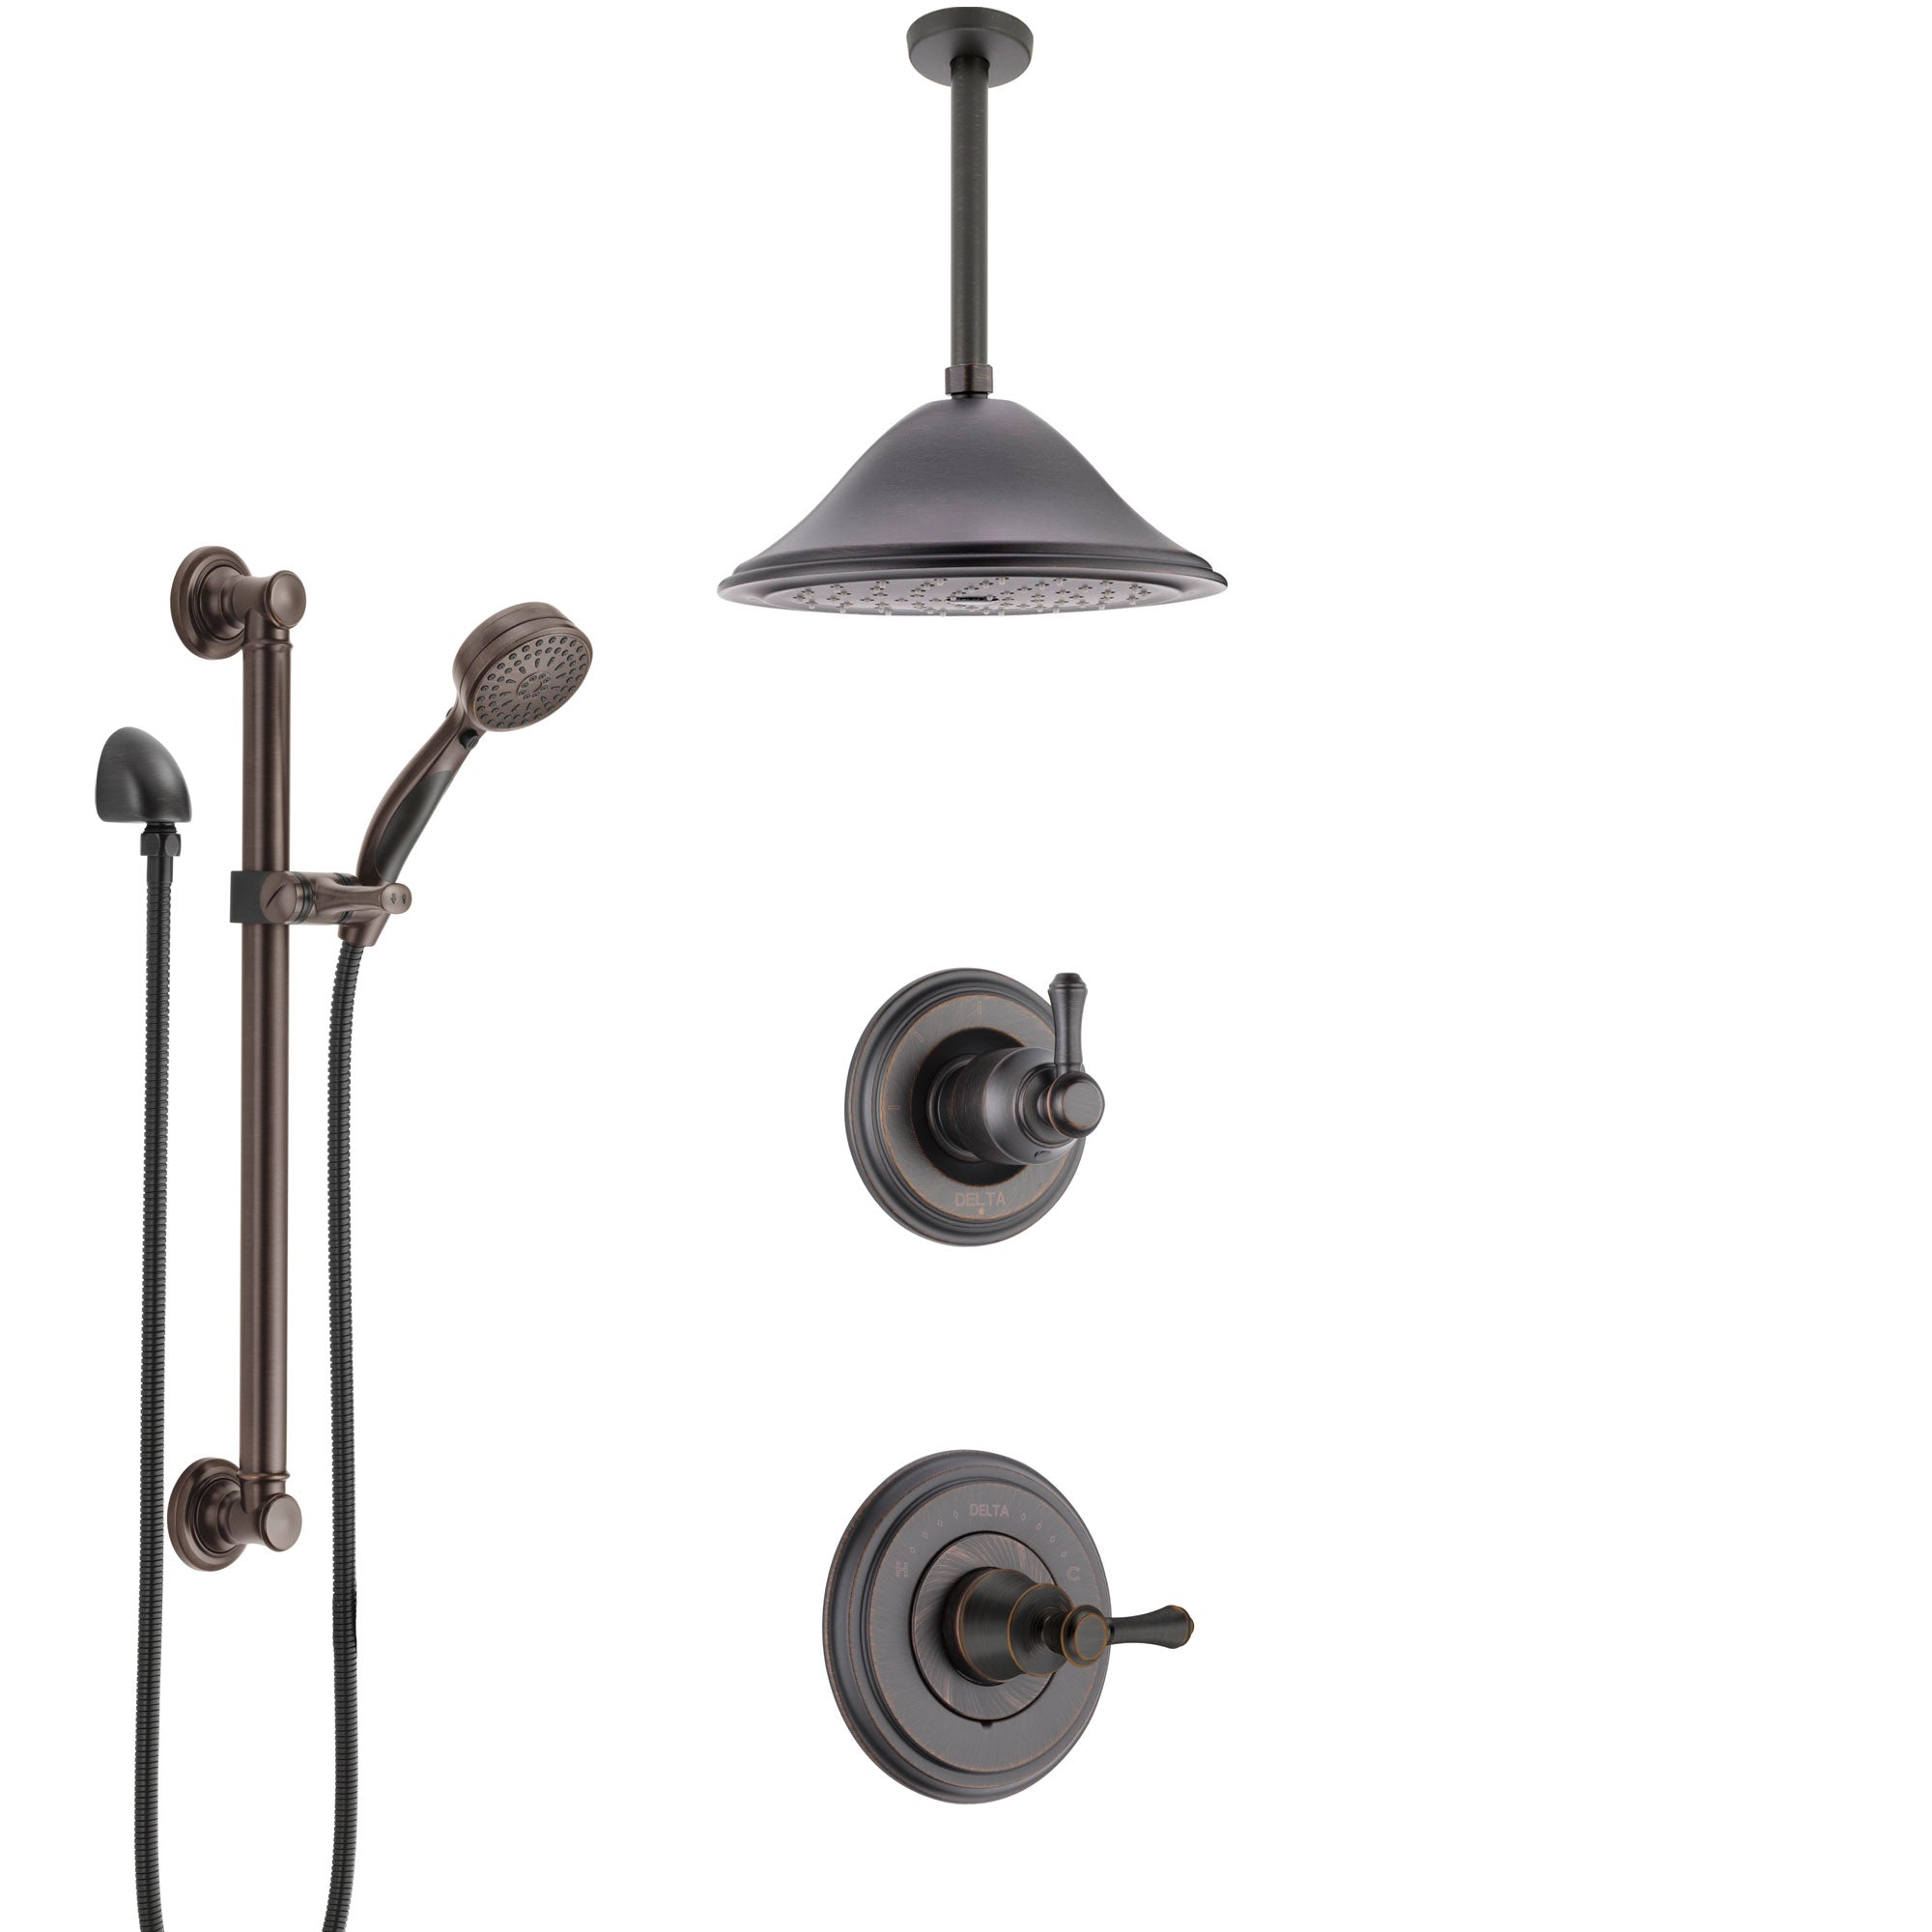 Delta Cassidy Venetian Bronze Shower System with Control Handle, Diverter, Ceiling Mount Showerhead, and Hand Shower with Grab Bar SS14973RB8